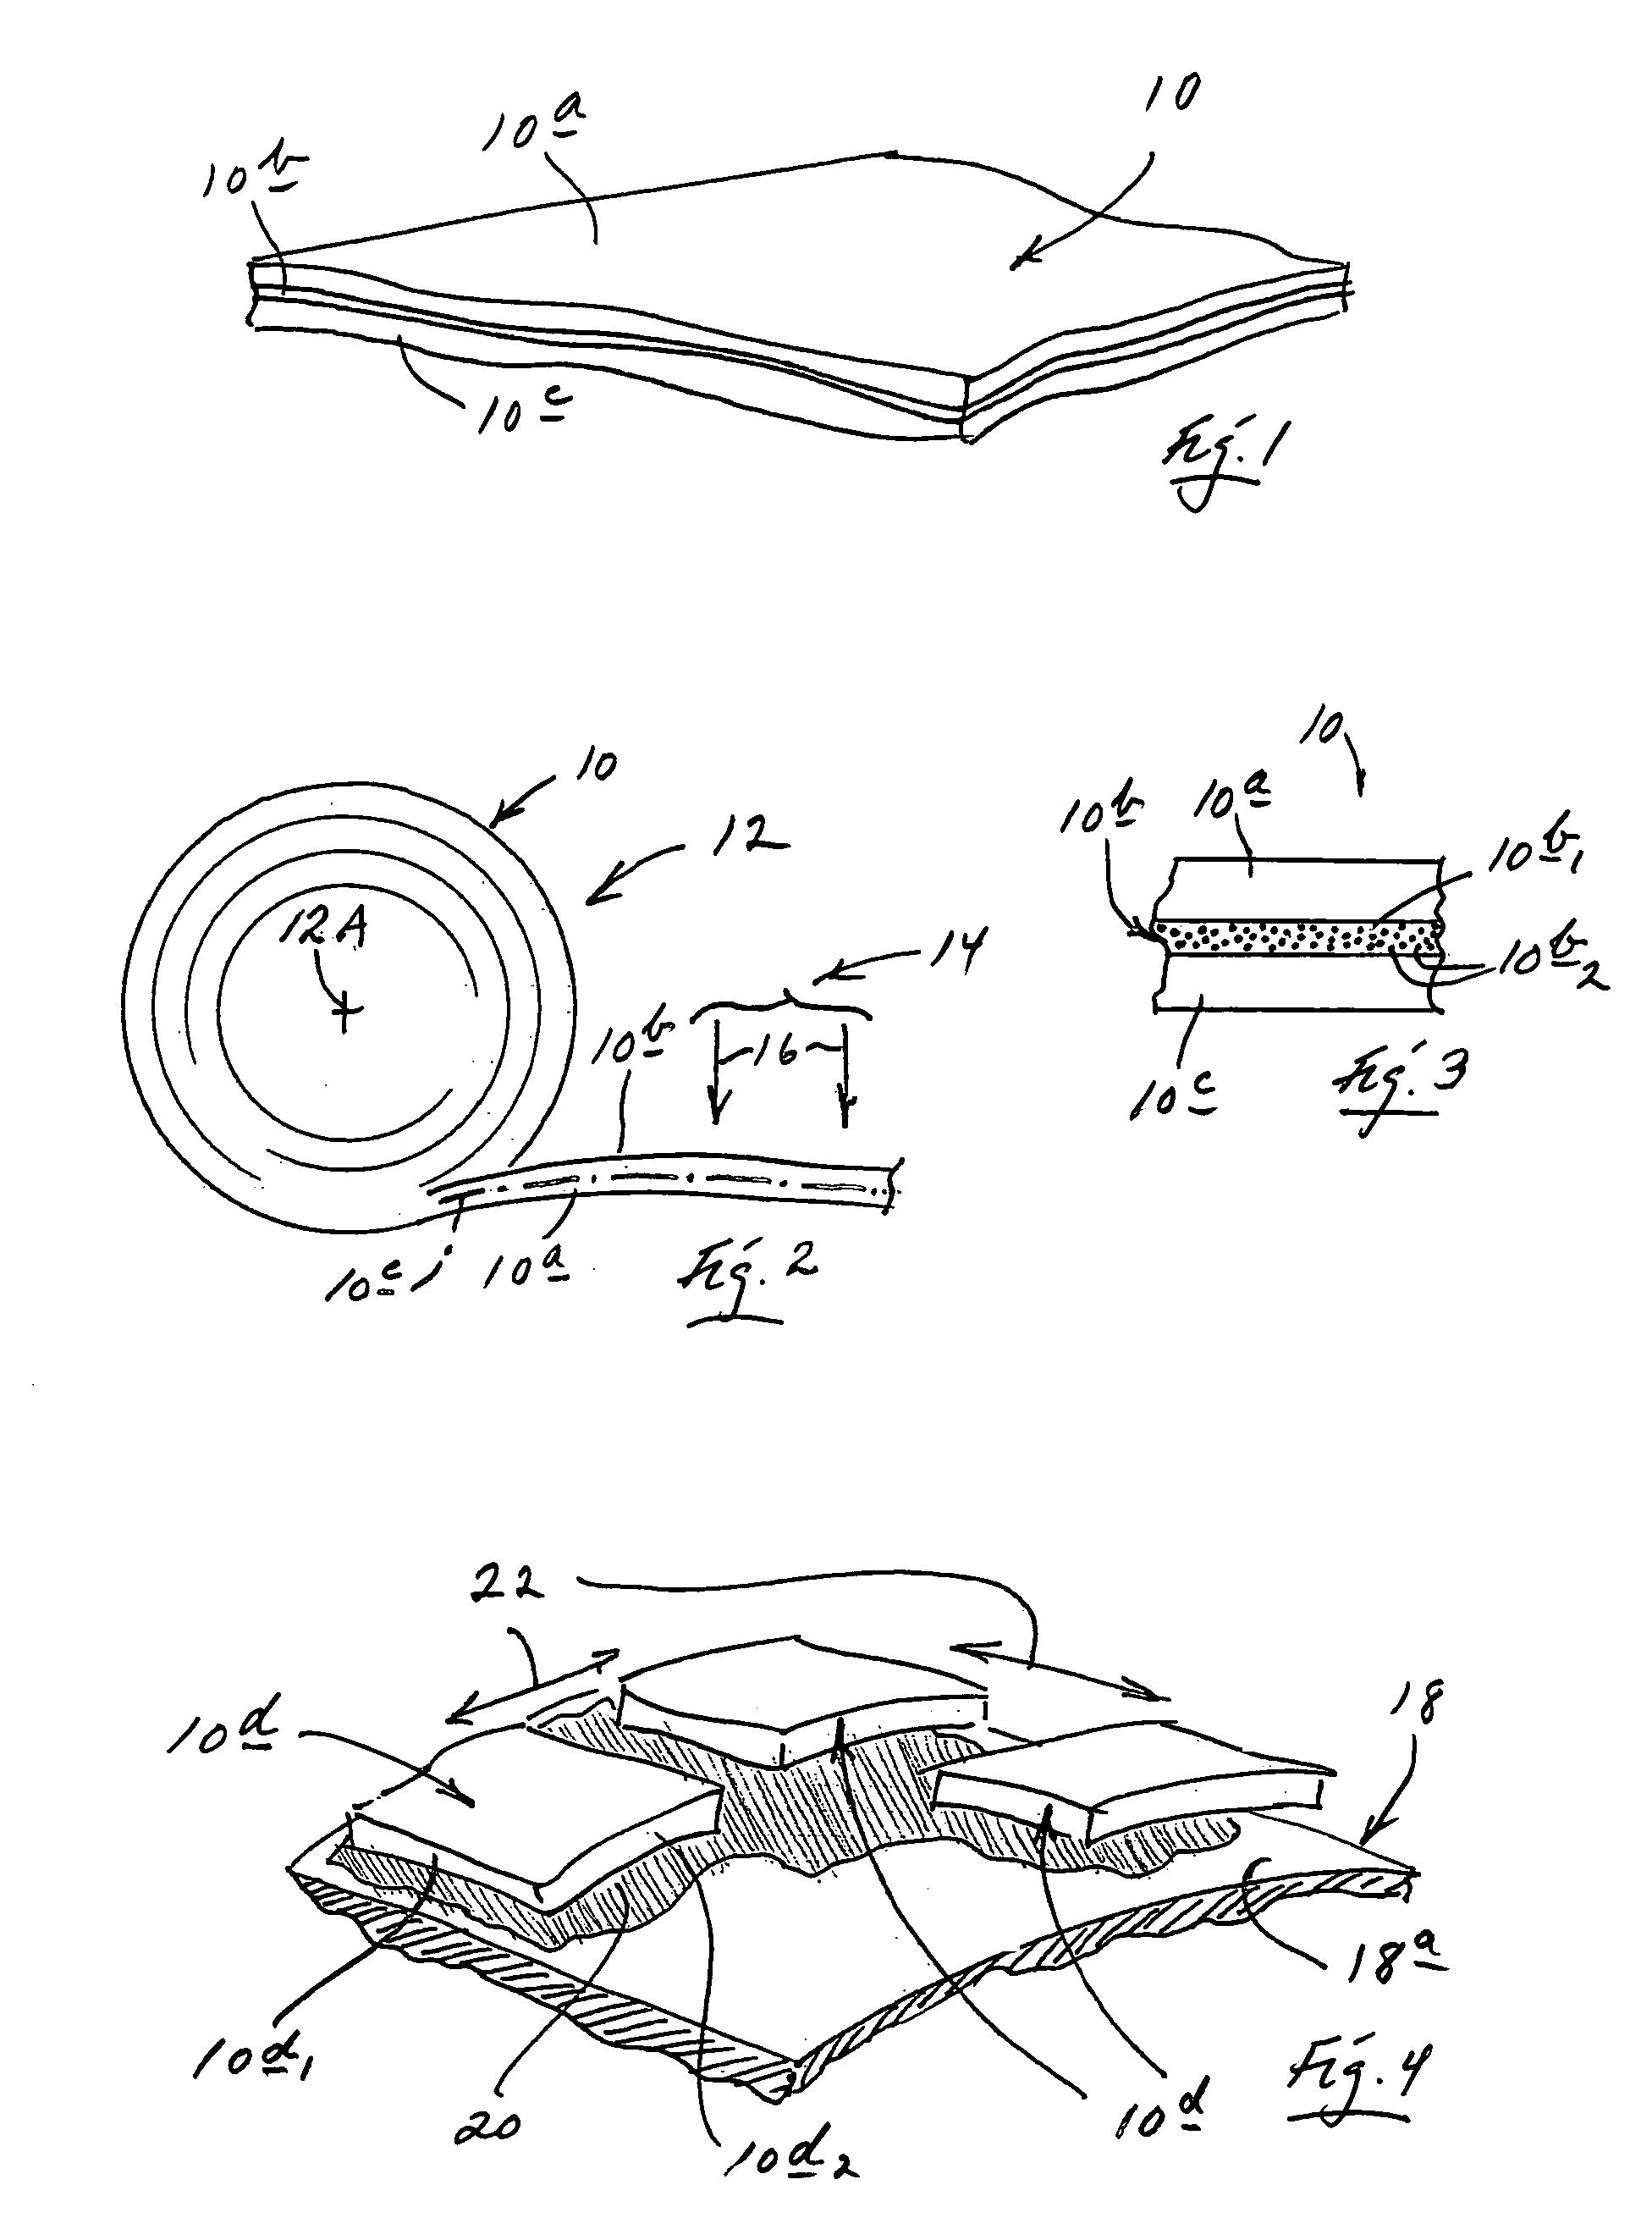 Adhereable, pre-fabricated, self-healing, anti-puncture coating for liquid container and methodology